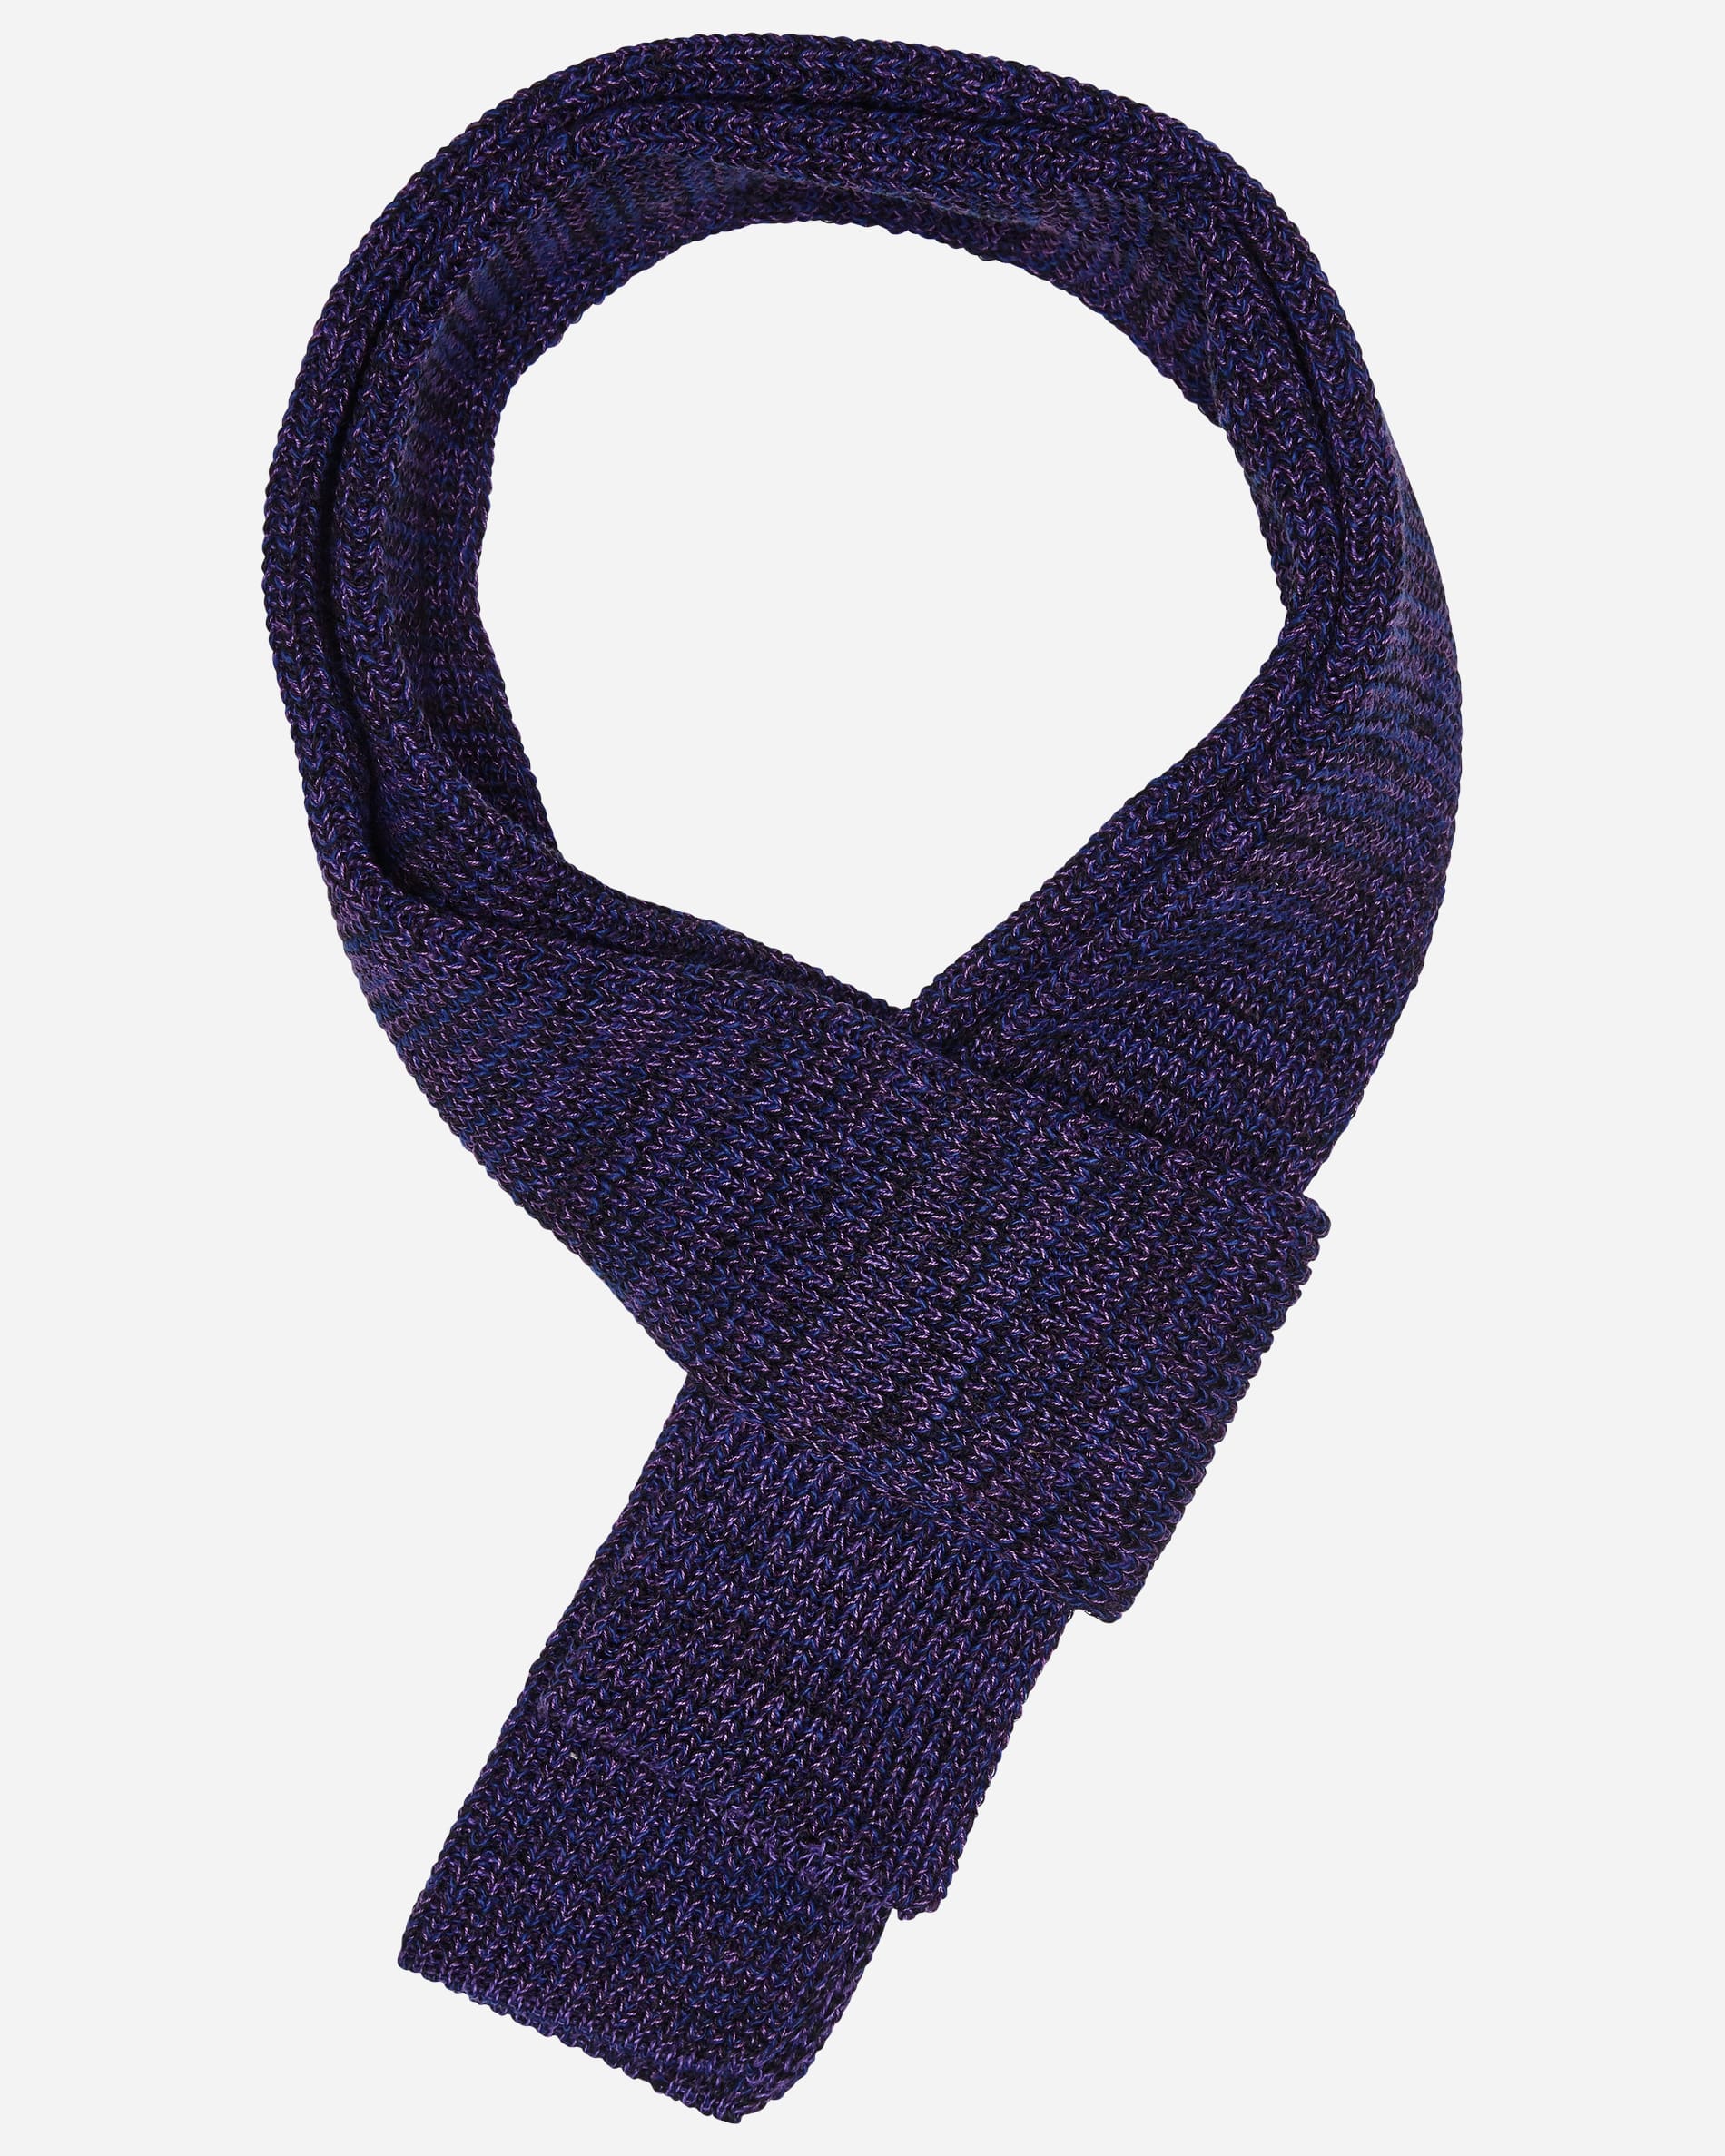 Purple Woven Scarf - Men's Scarves at Menzclub